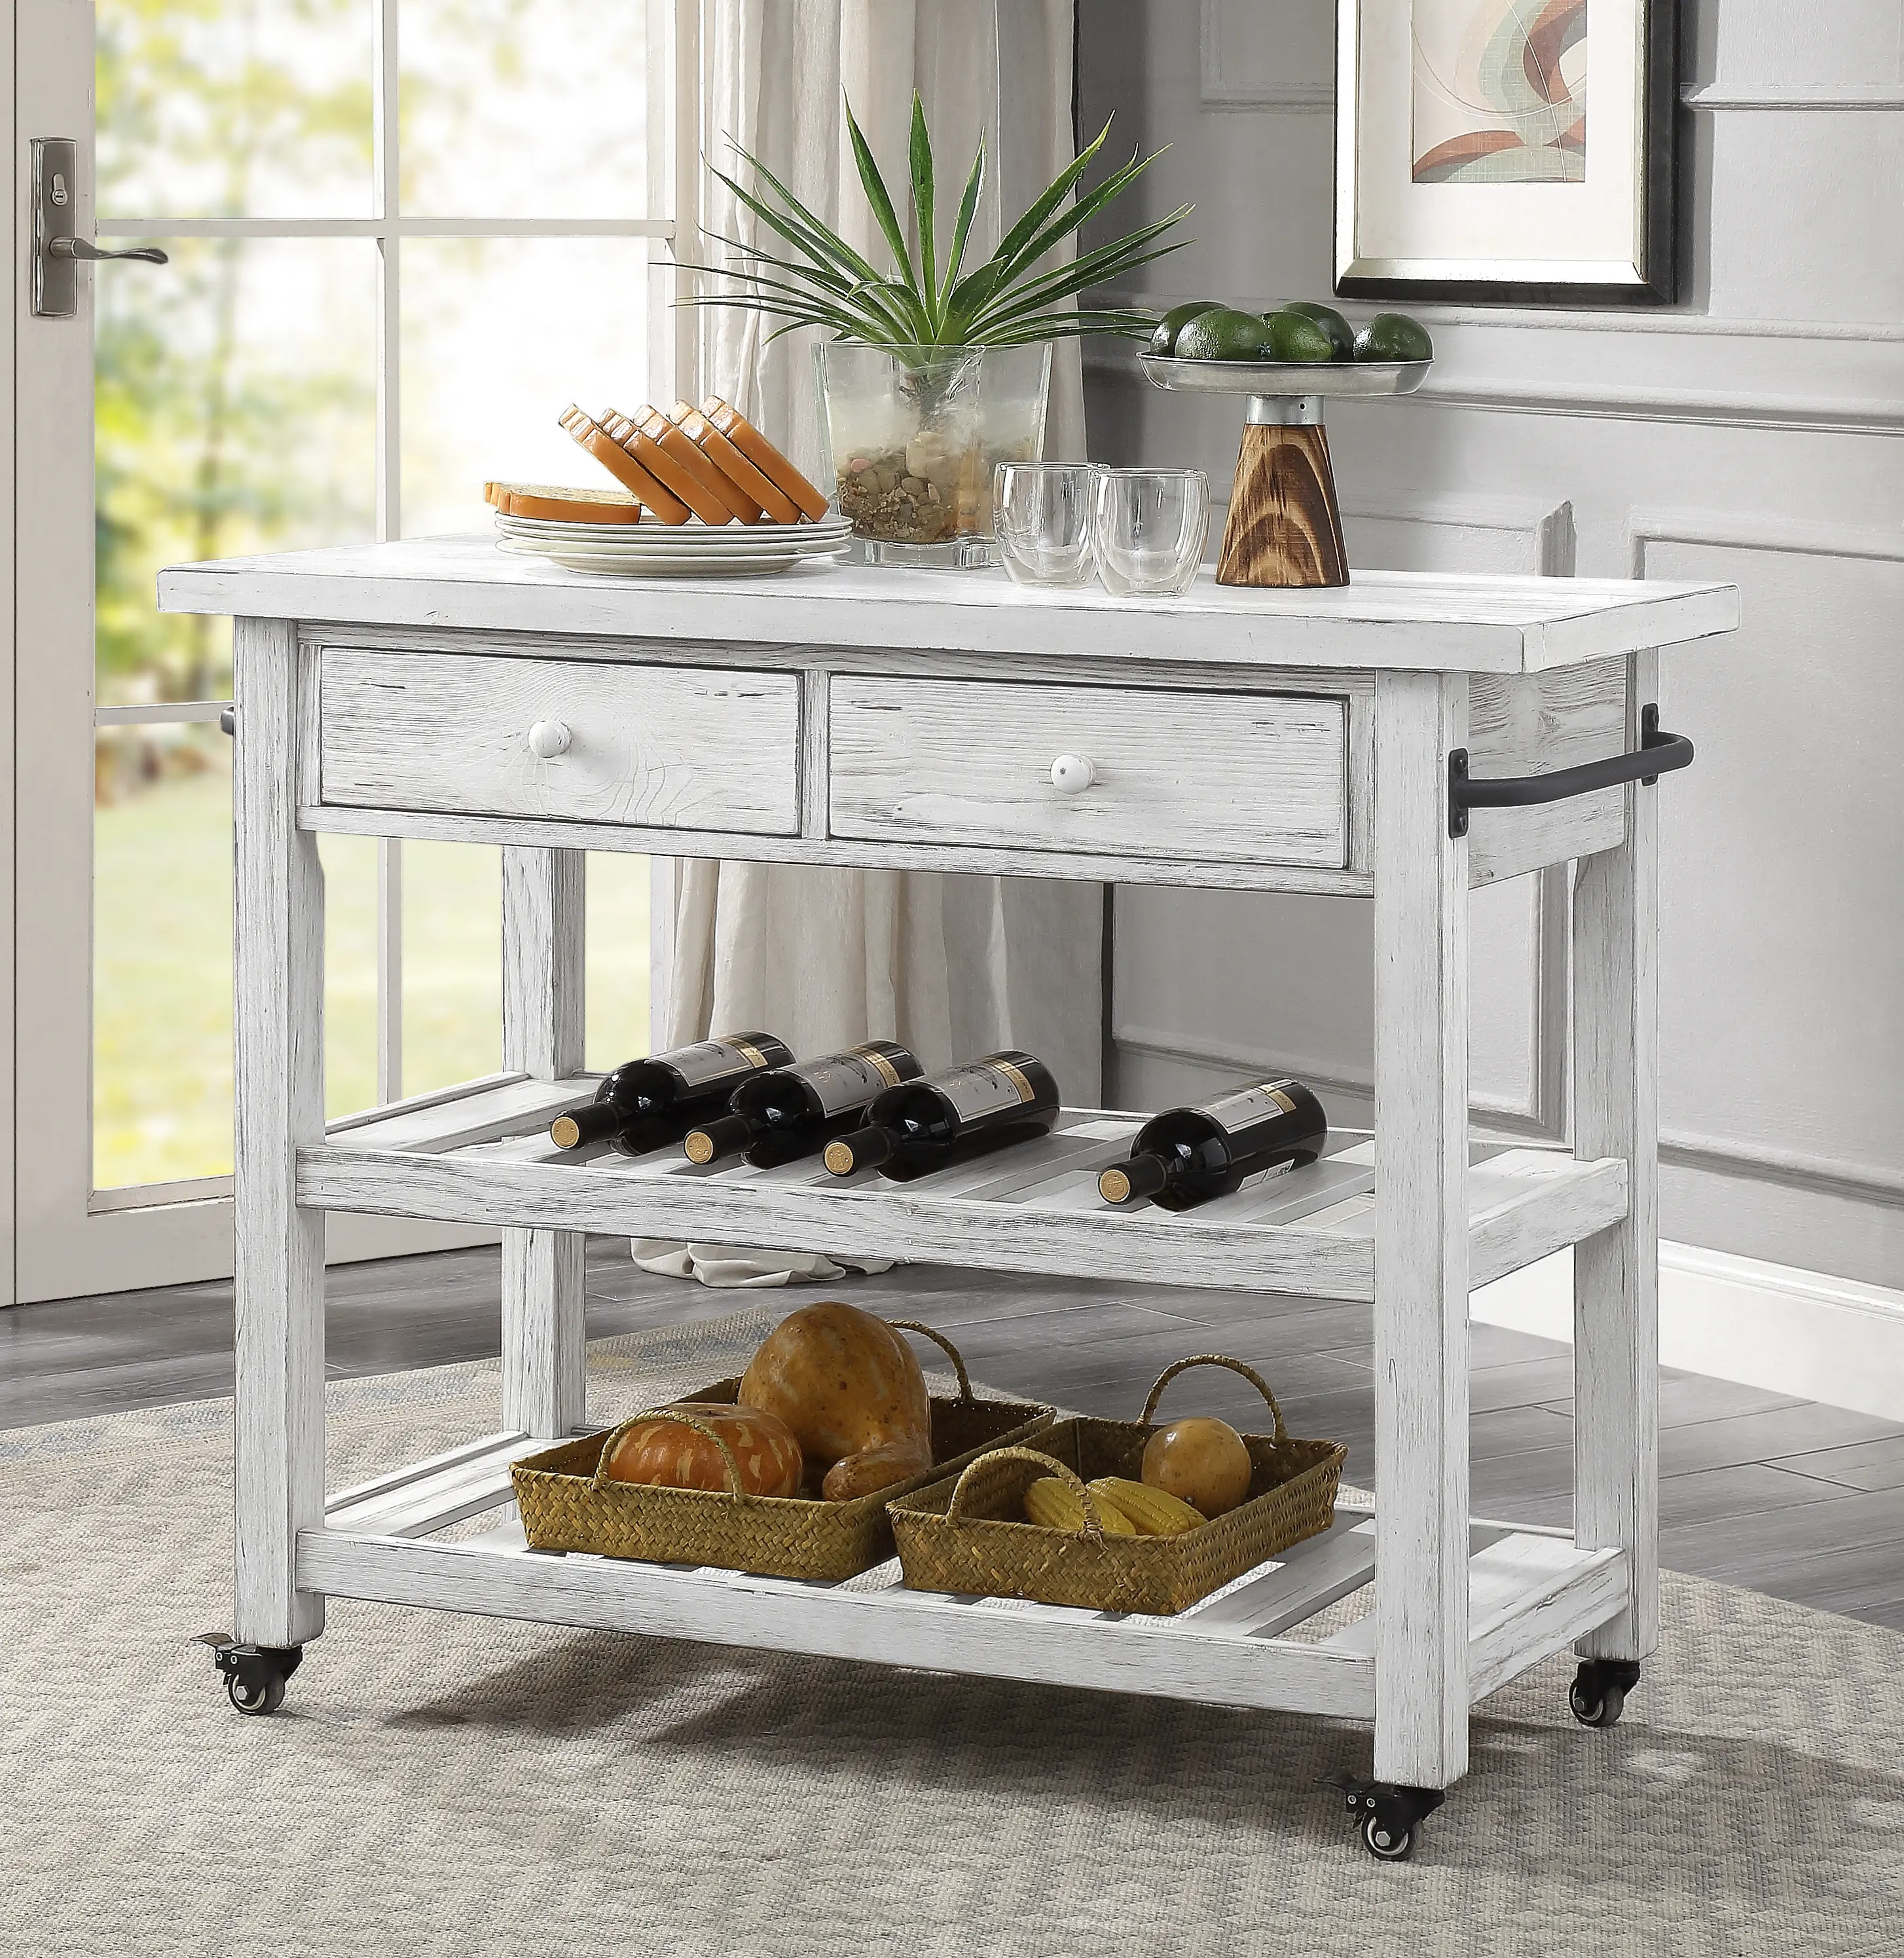 30434 Orchard Park Traditional White 2-Drawer Kitchen Ca sku 30434